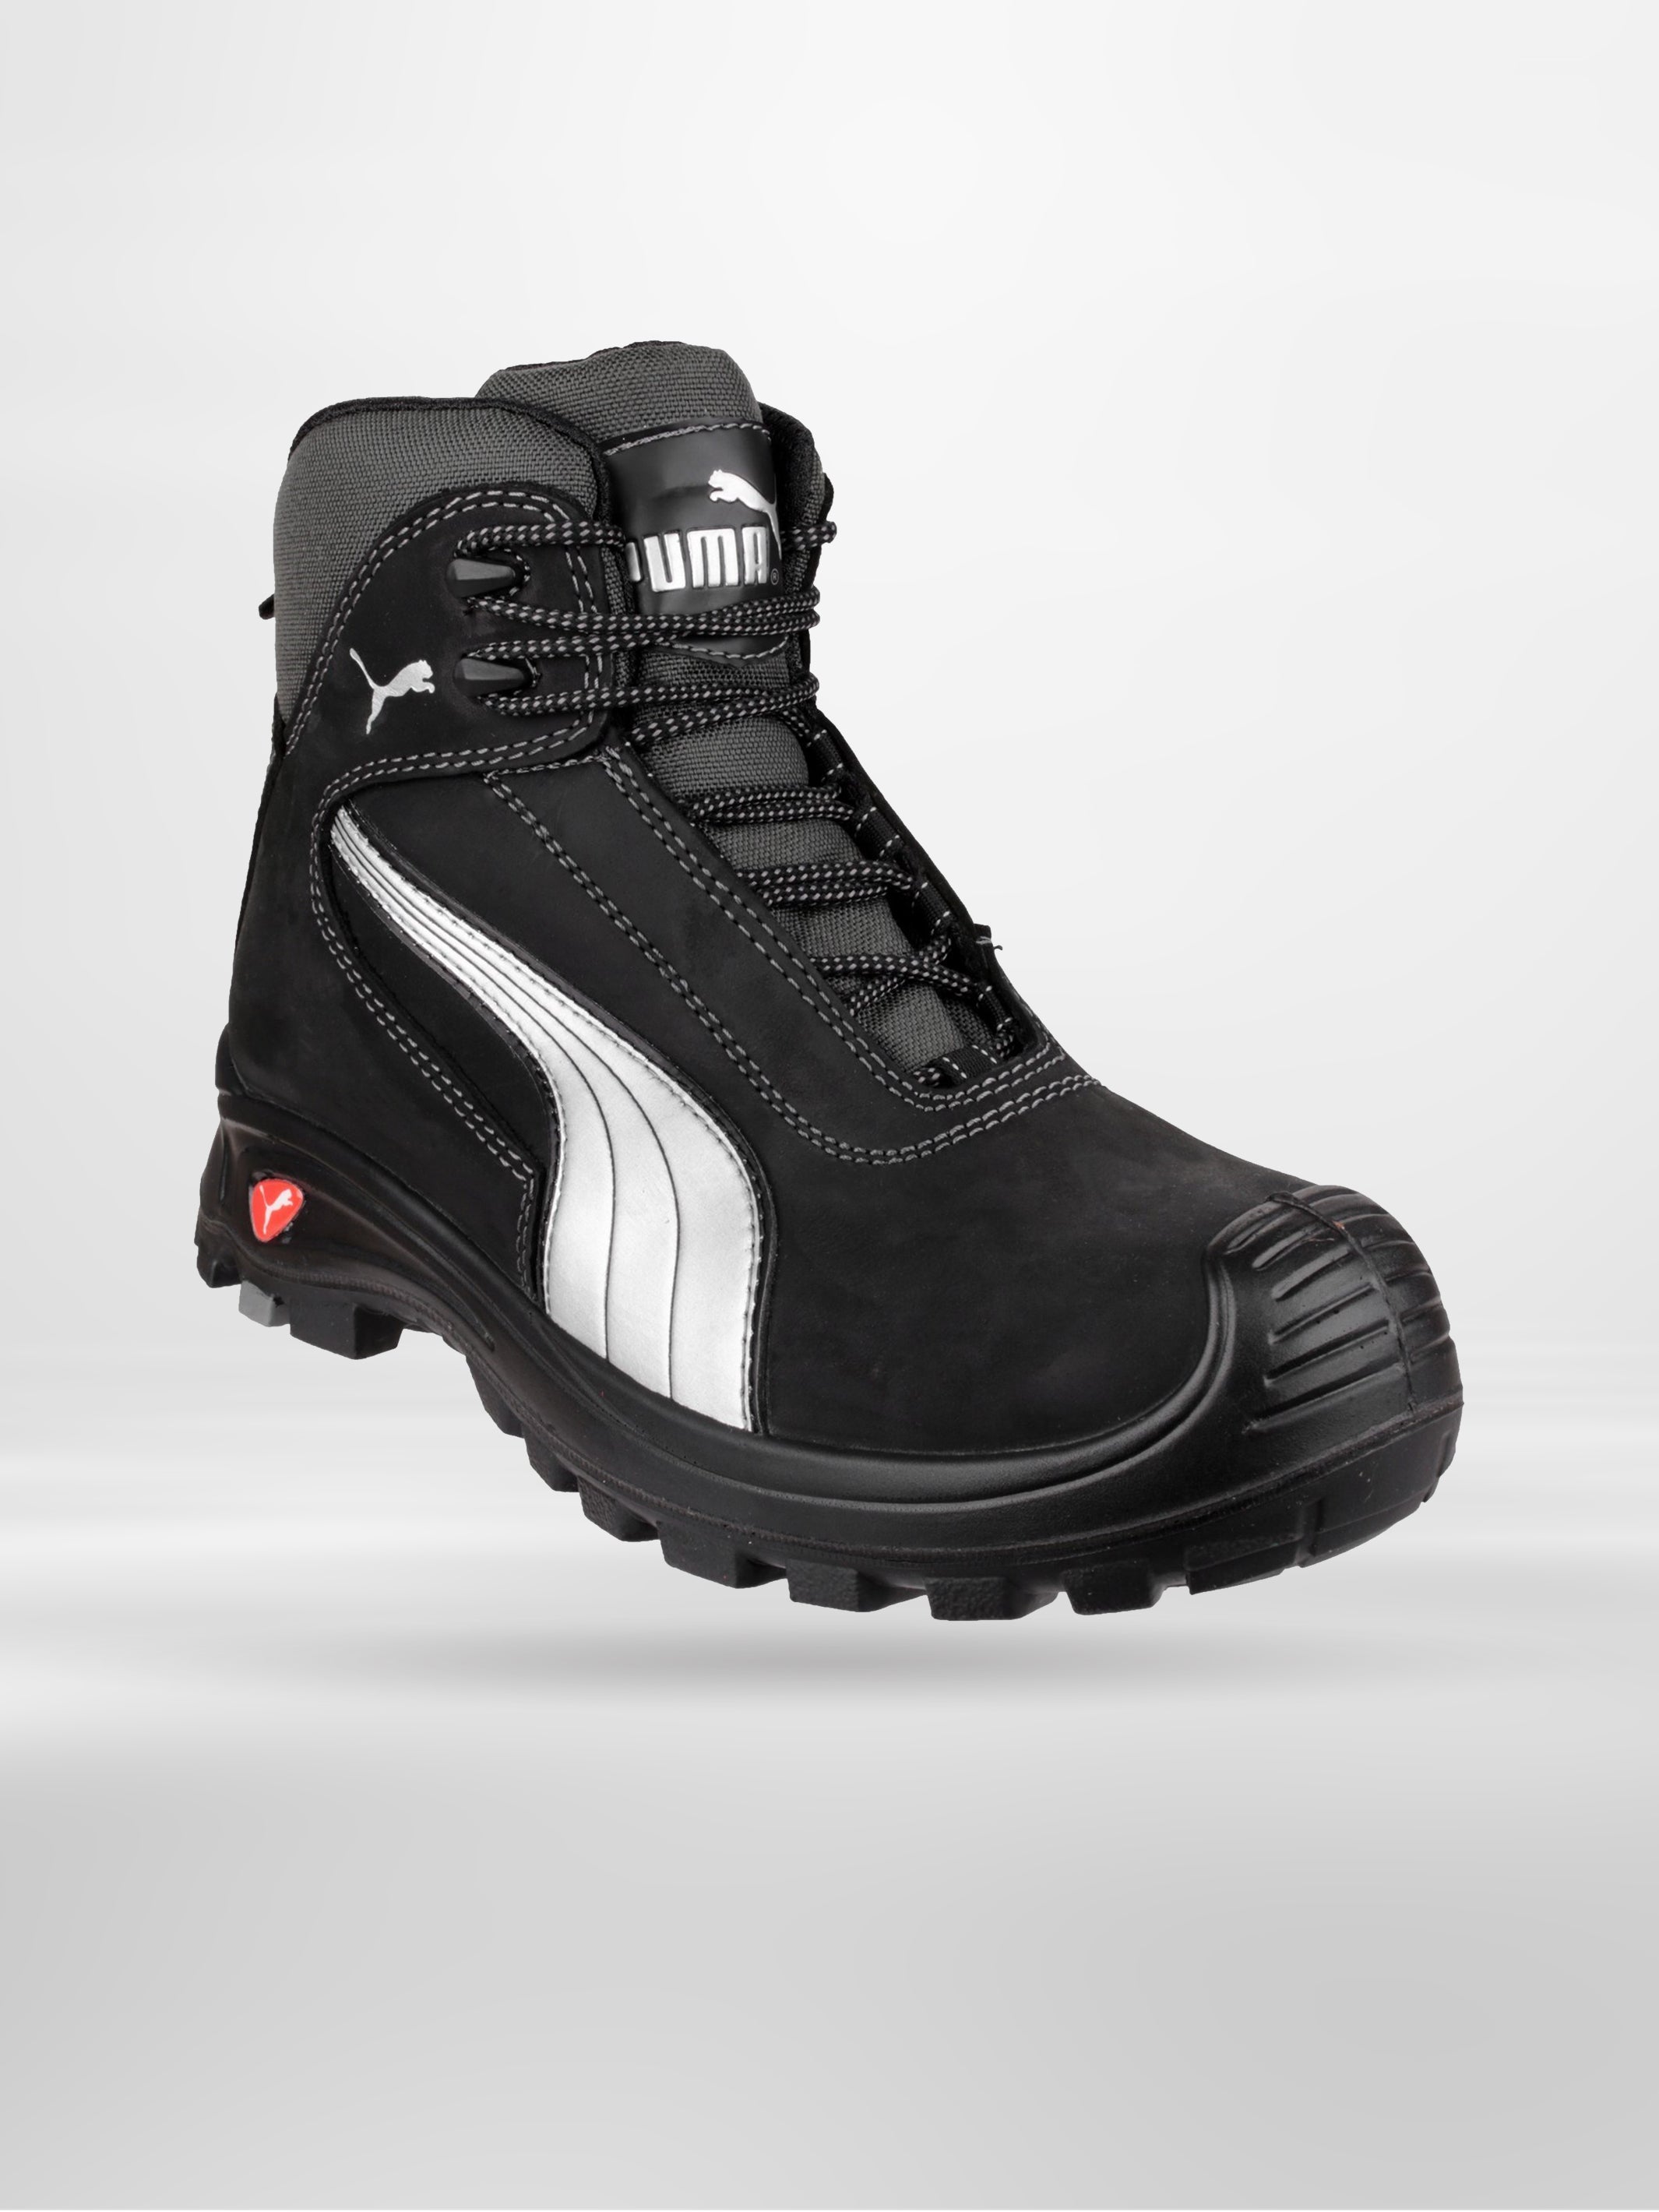 Puma Safety Mens Cascades Mid S3 Safety Boot